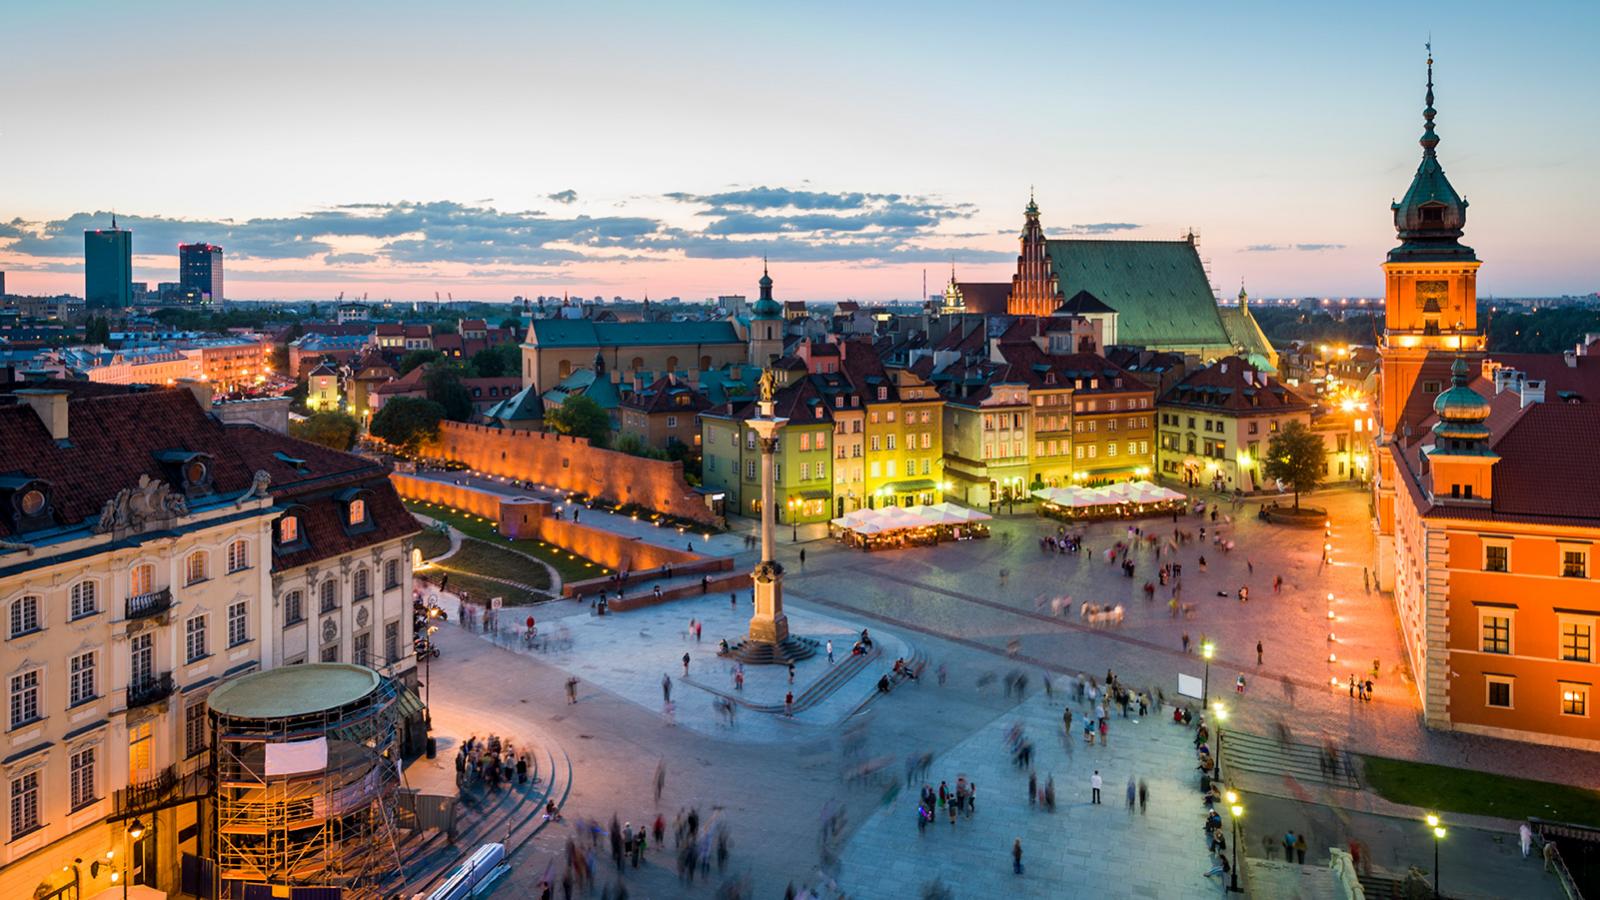 Aerial view of a square in Old Town Warsaw